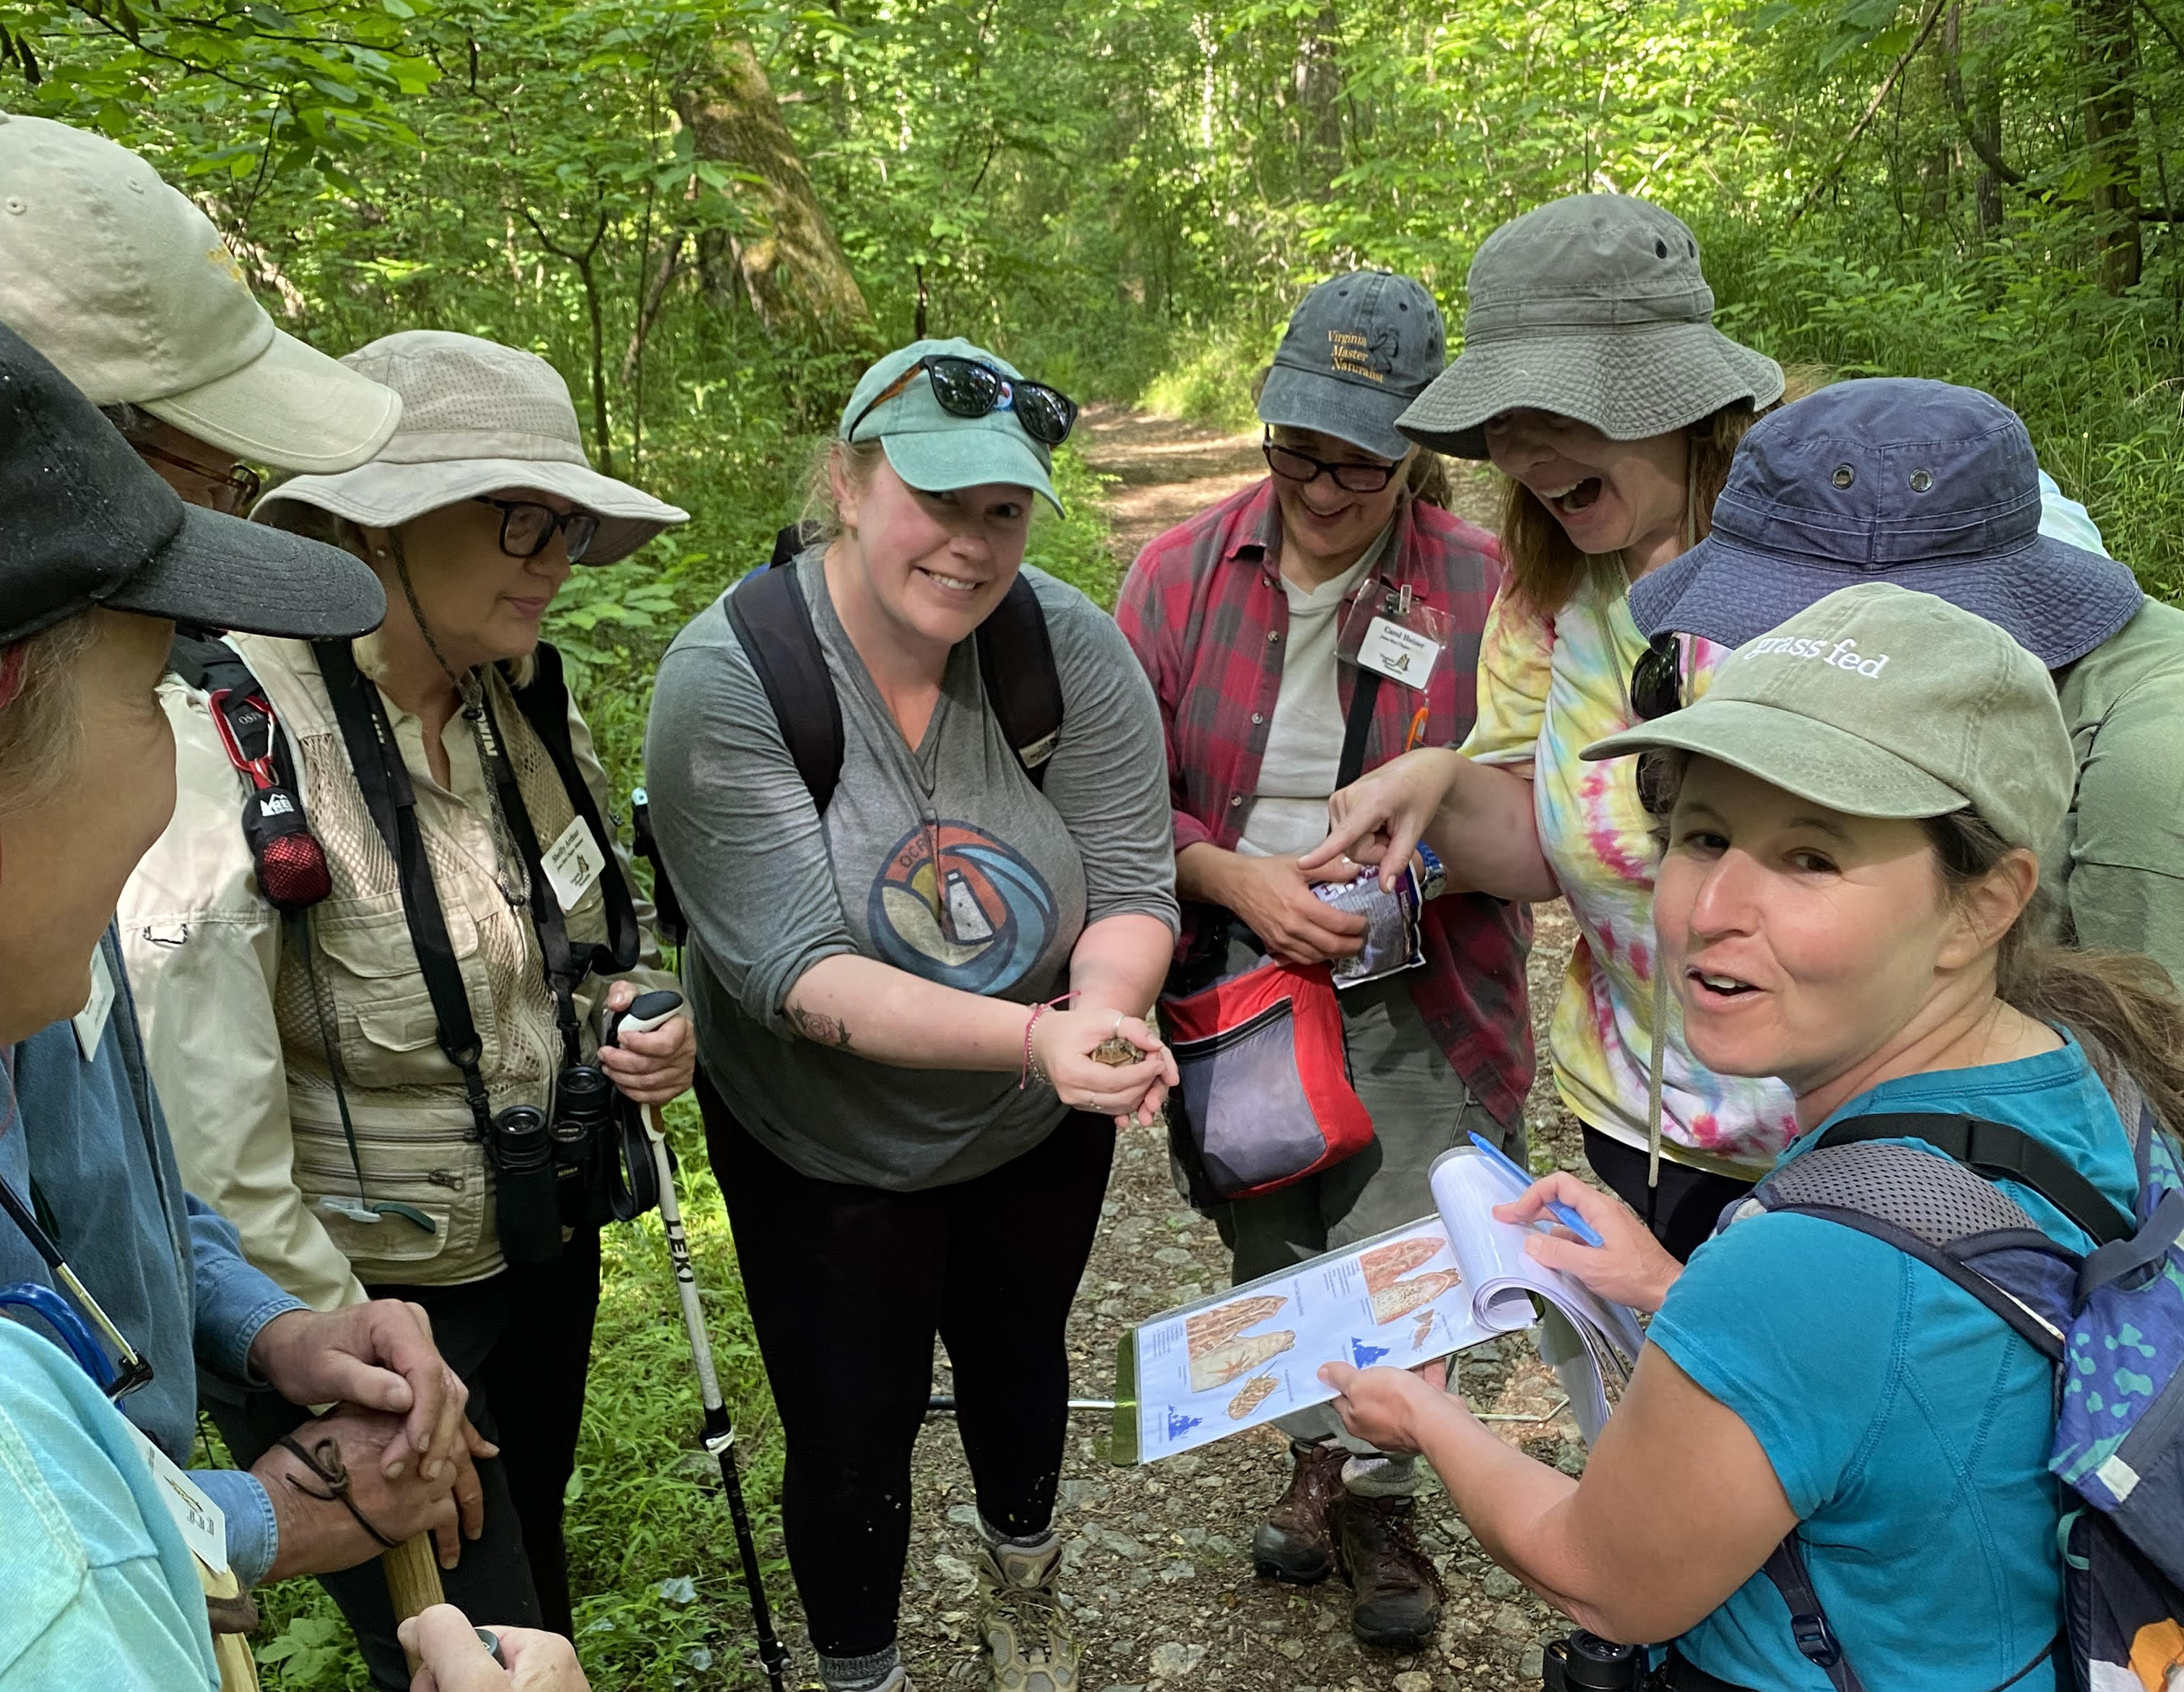 A group examining a toad